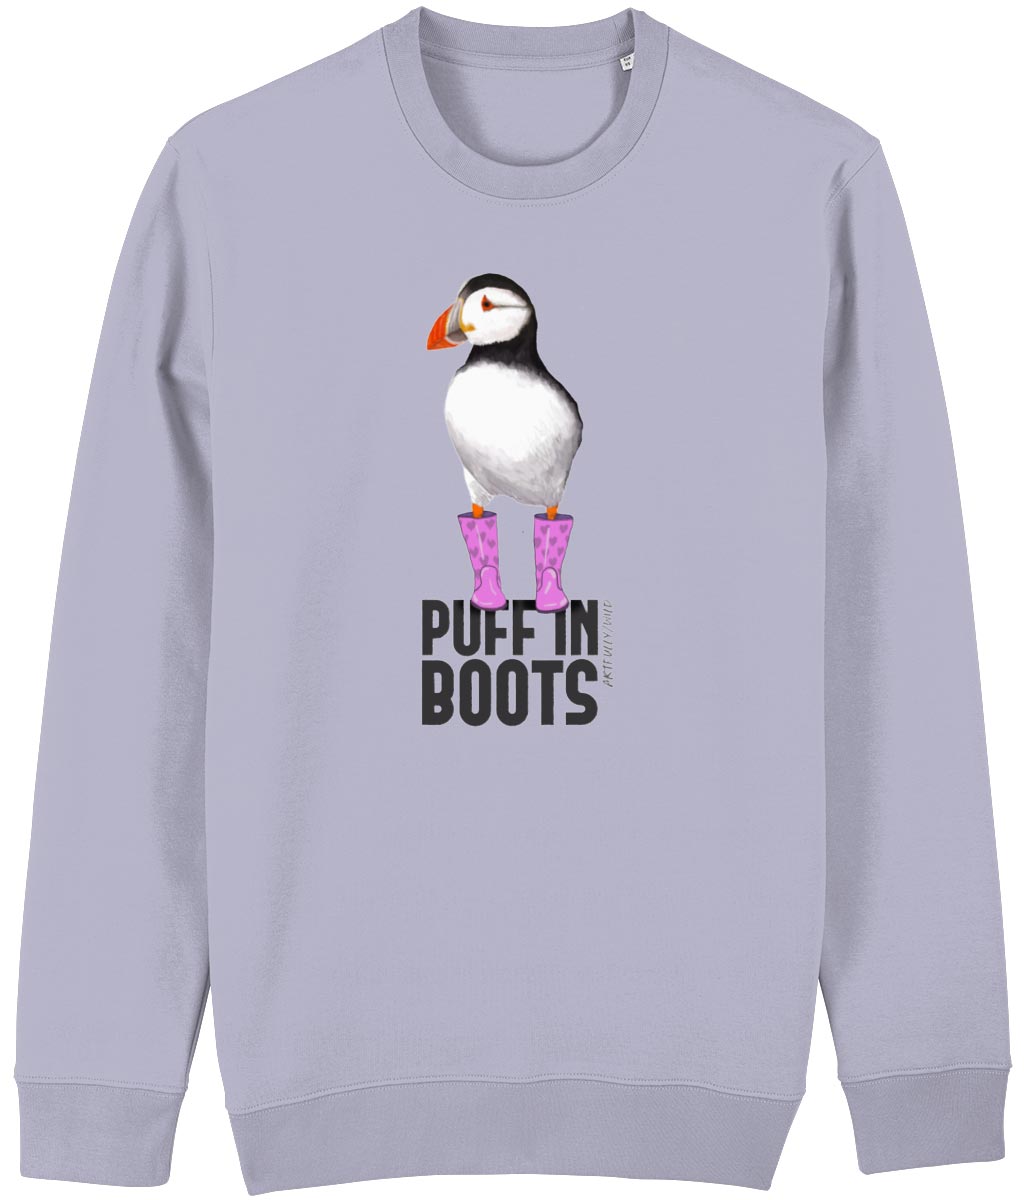 PUFF IN PINK BOOTS Organic Cotton Unisex Lavender Crew Neck Sweatshirt. Printed with eco-friendly water-based Inks. Original Design by Artfully Wild.